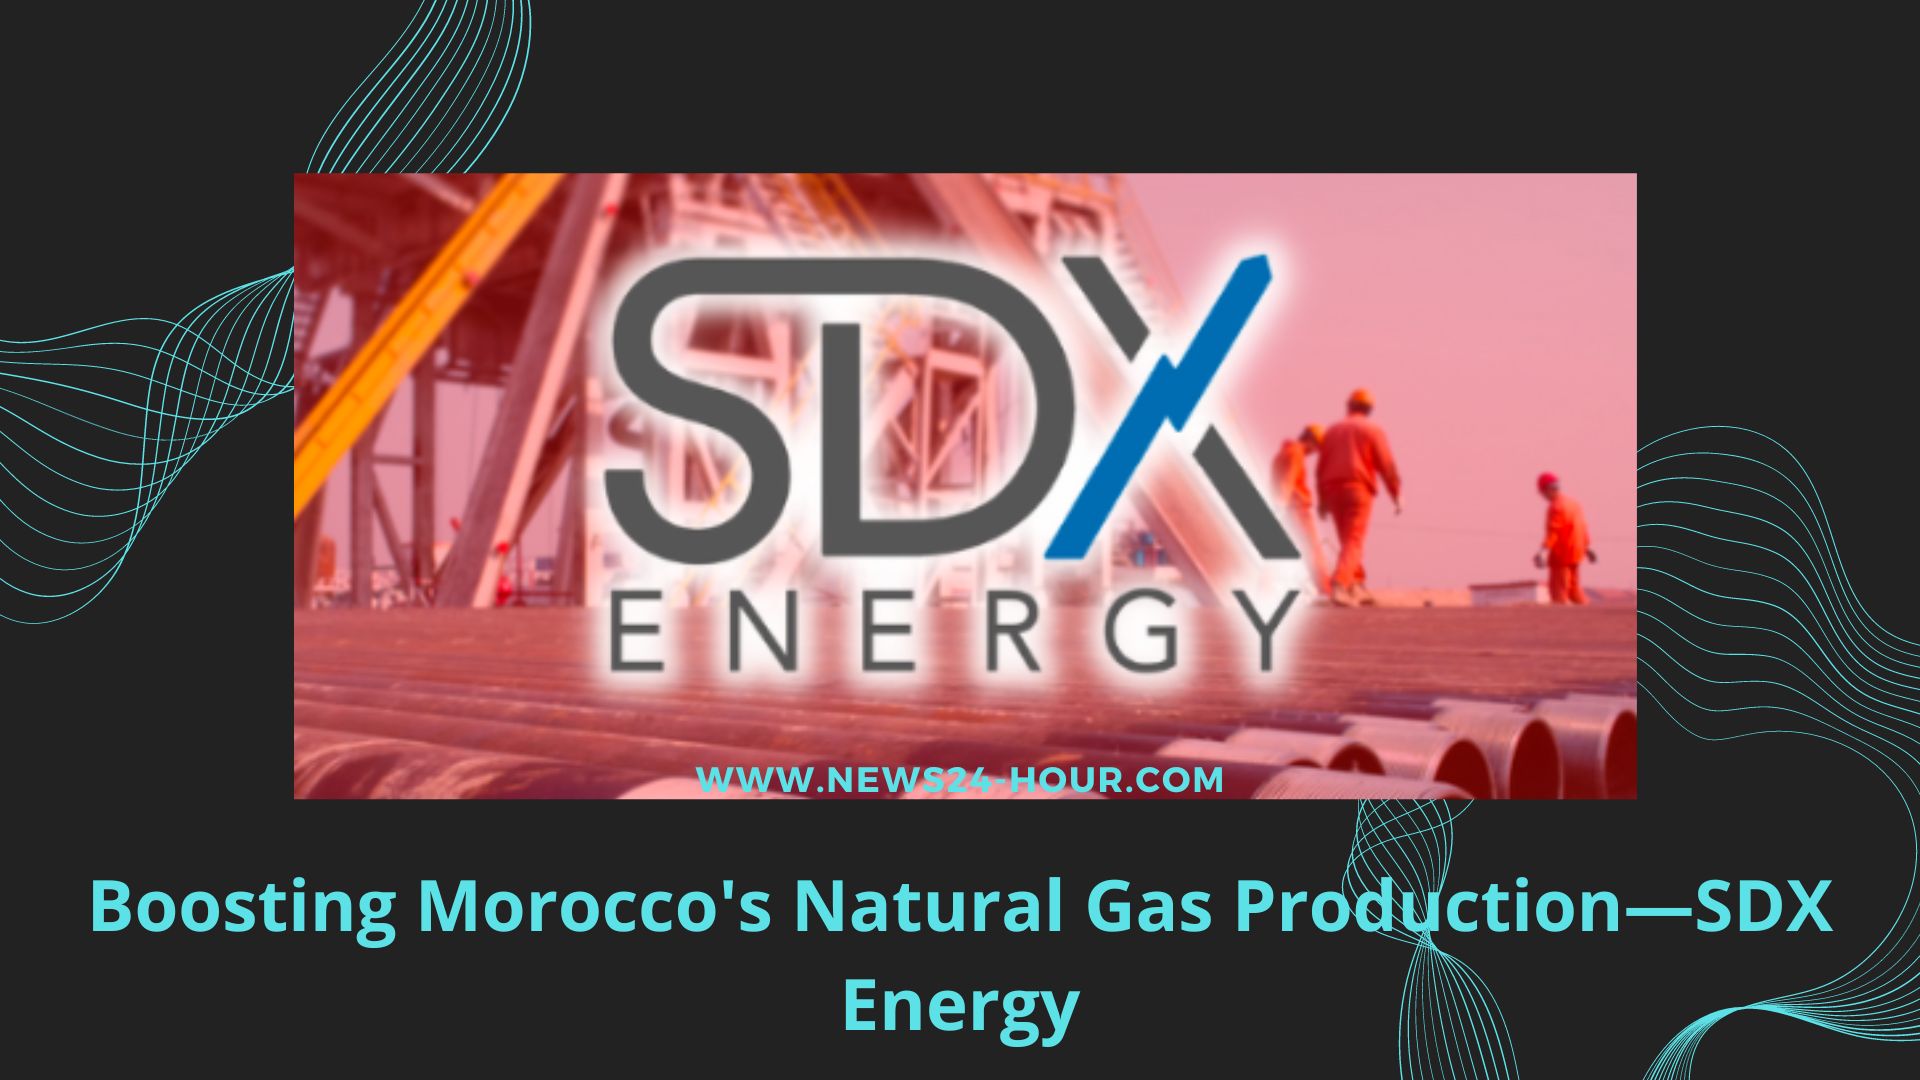 You are currently viewing Strengthening Morocco’s Gas Production, SDX Energy